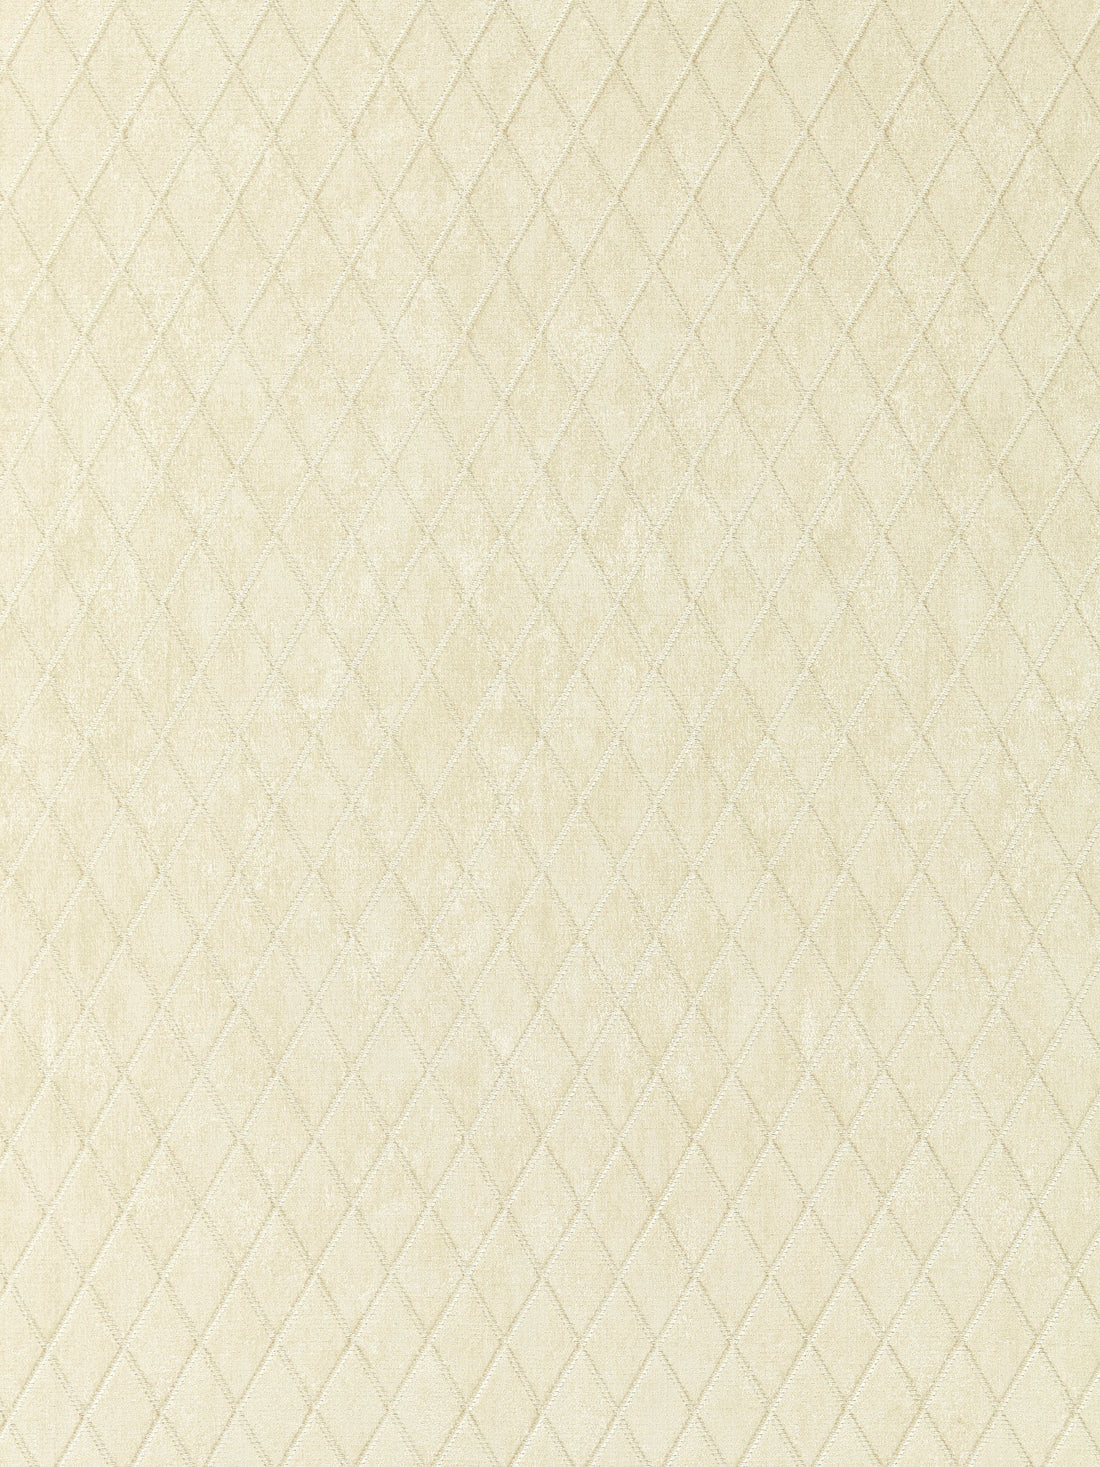 Diamond Weave fabric in putty color - pattern number SC 000227143 - by Scalamandre in the Scalamandre Fabrics Book 1 collection